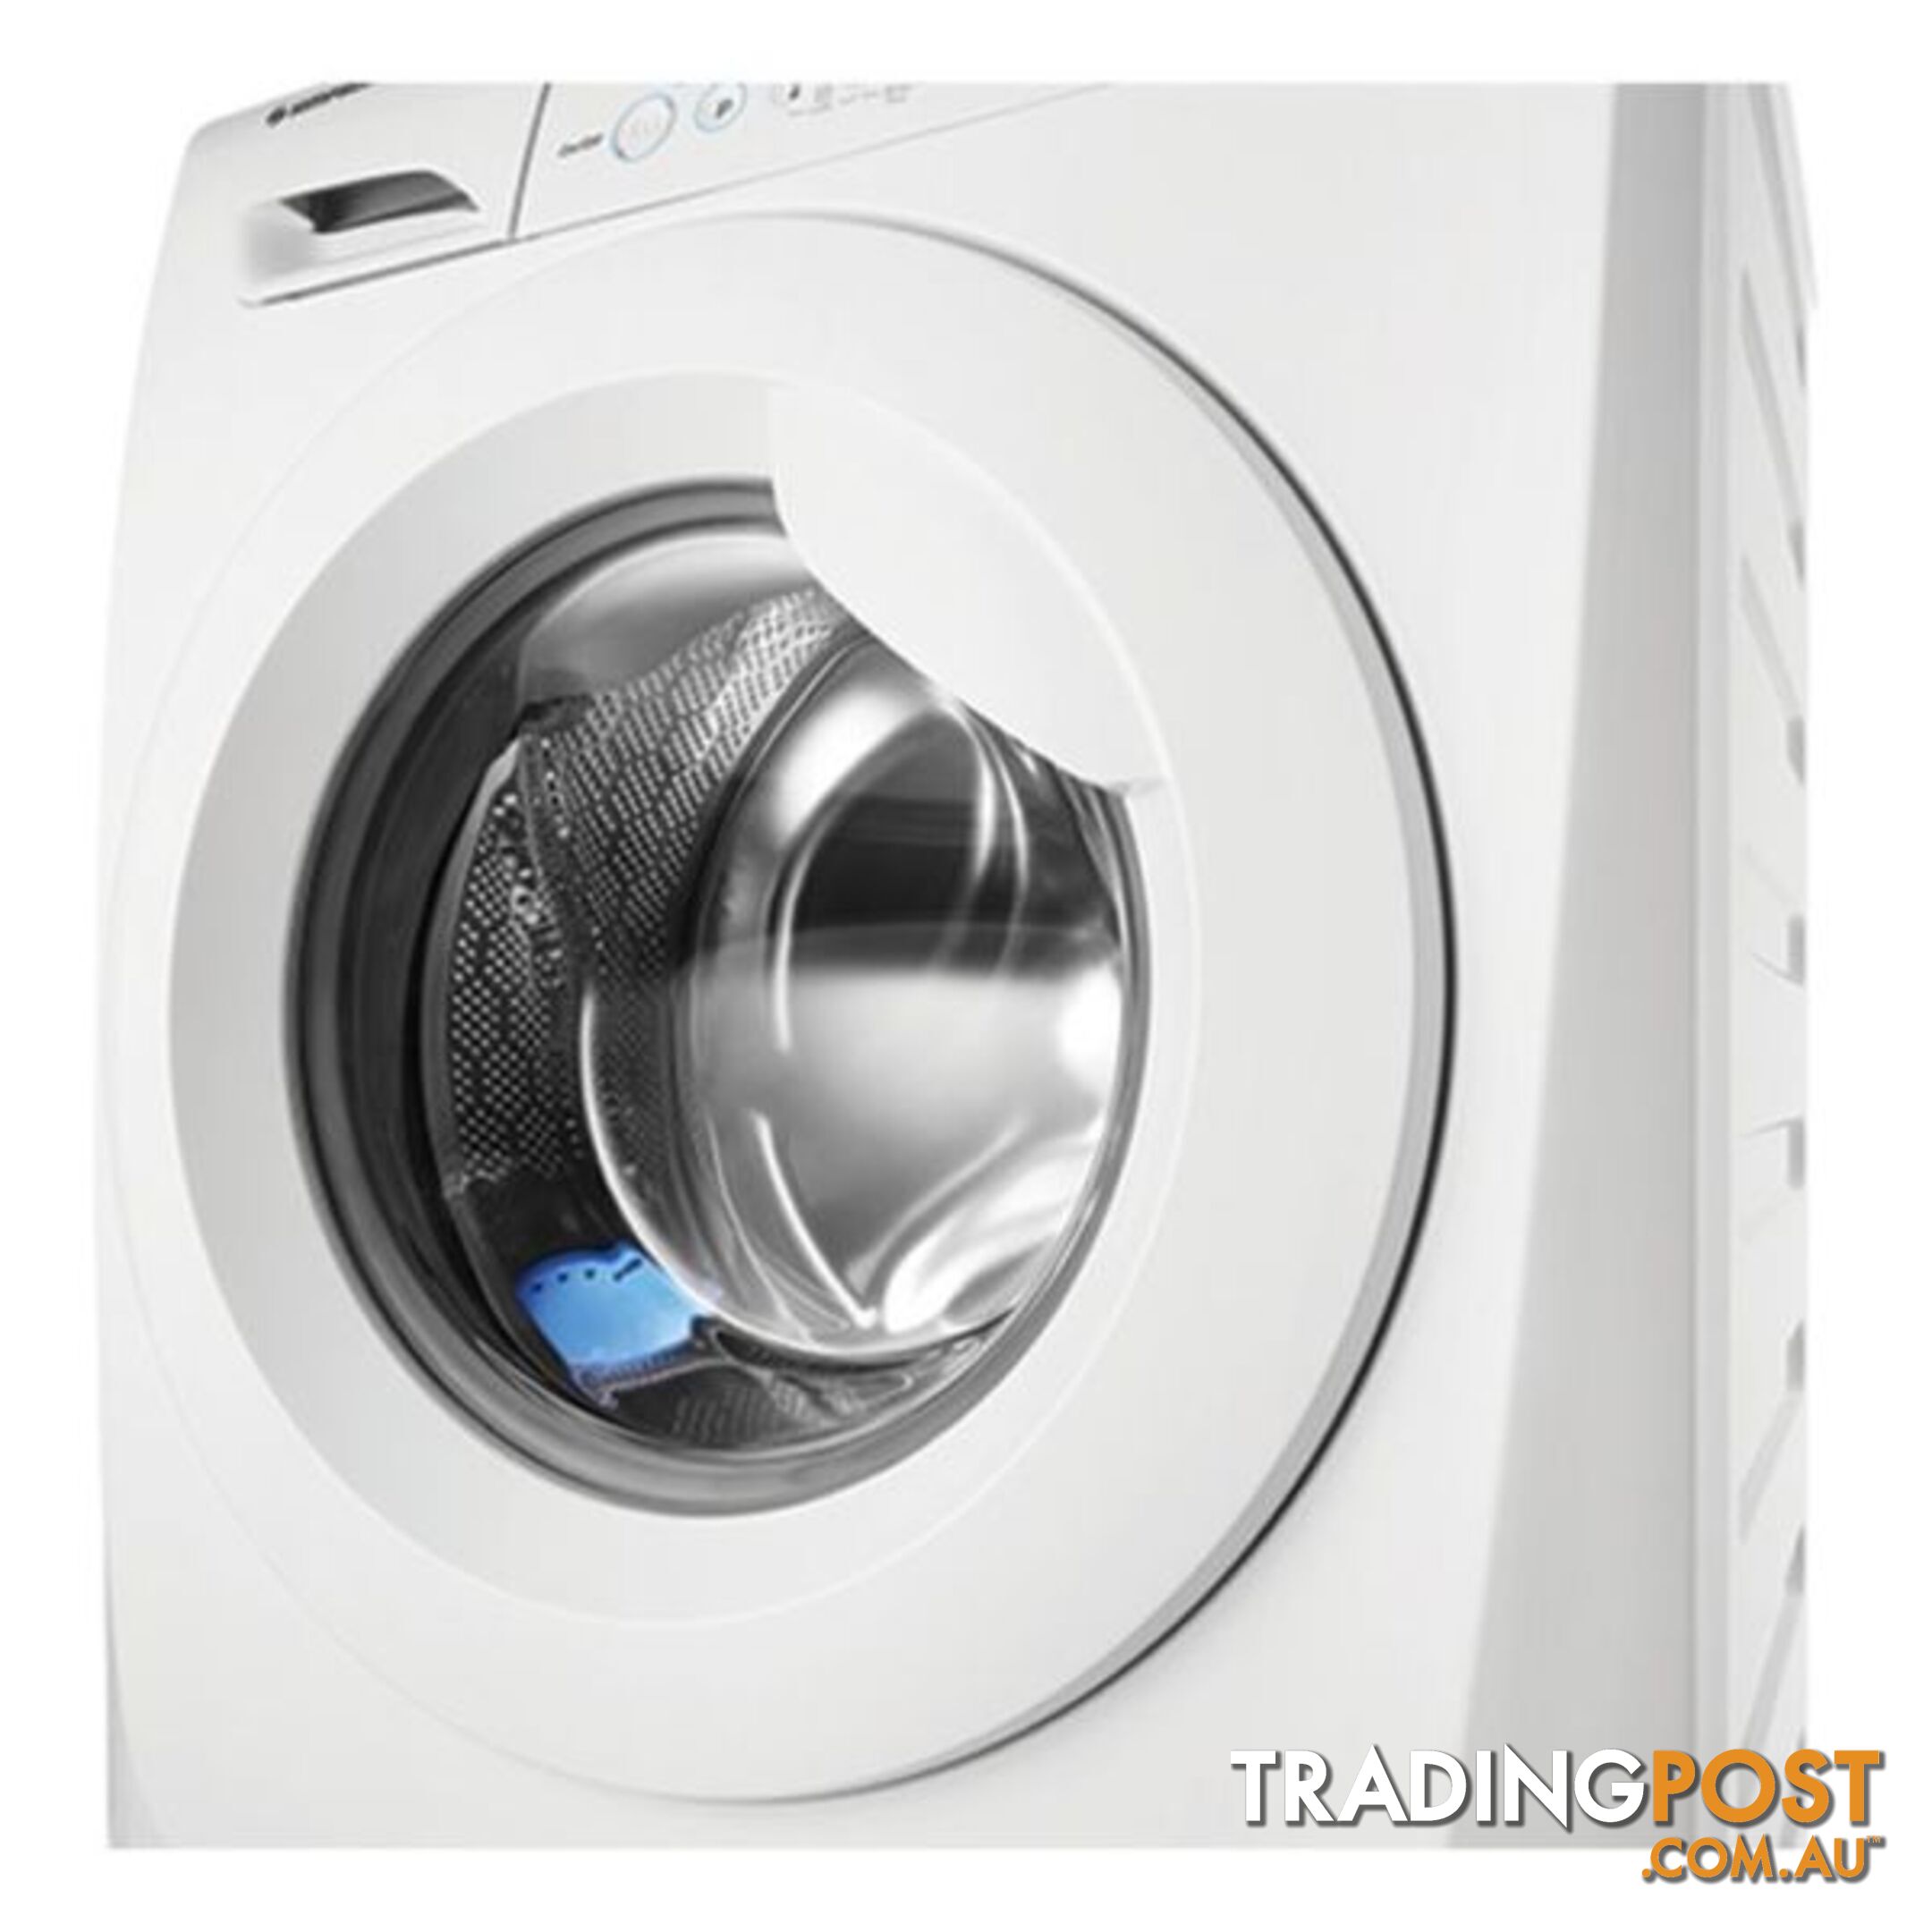 Simpson 8kg Front Load 1400RPM Spin Washer Model: SWF14843